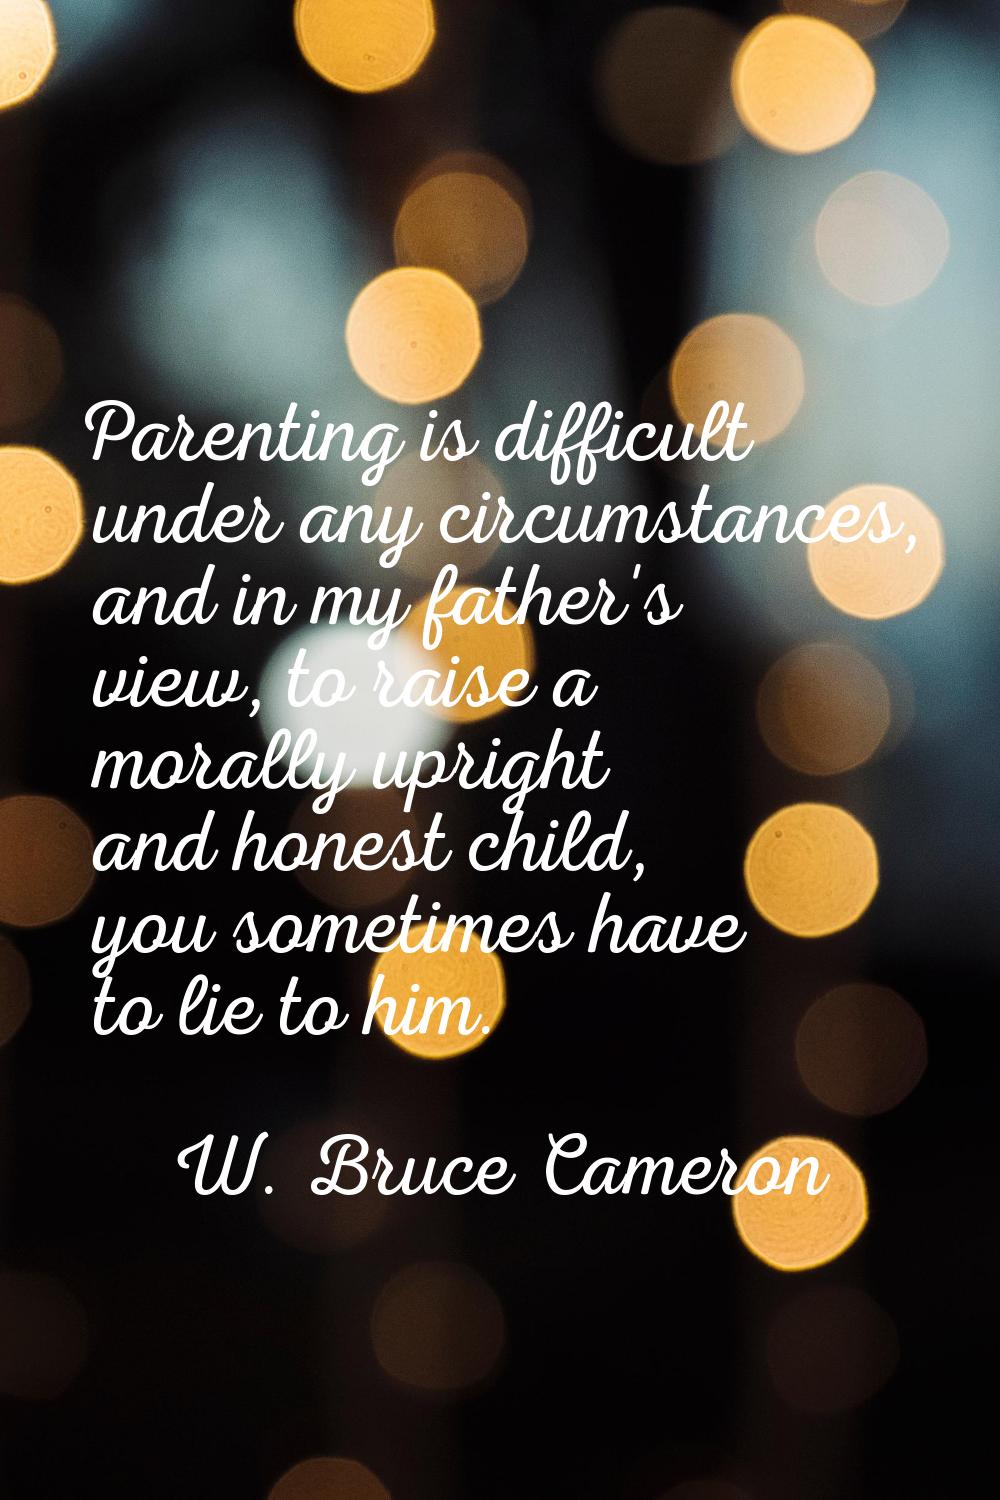 Parenting is difficult under any circumstances, and in my father's view, to raise a morally upright